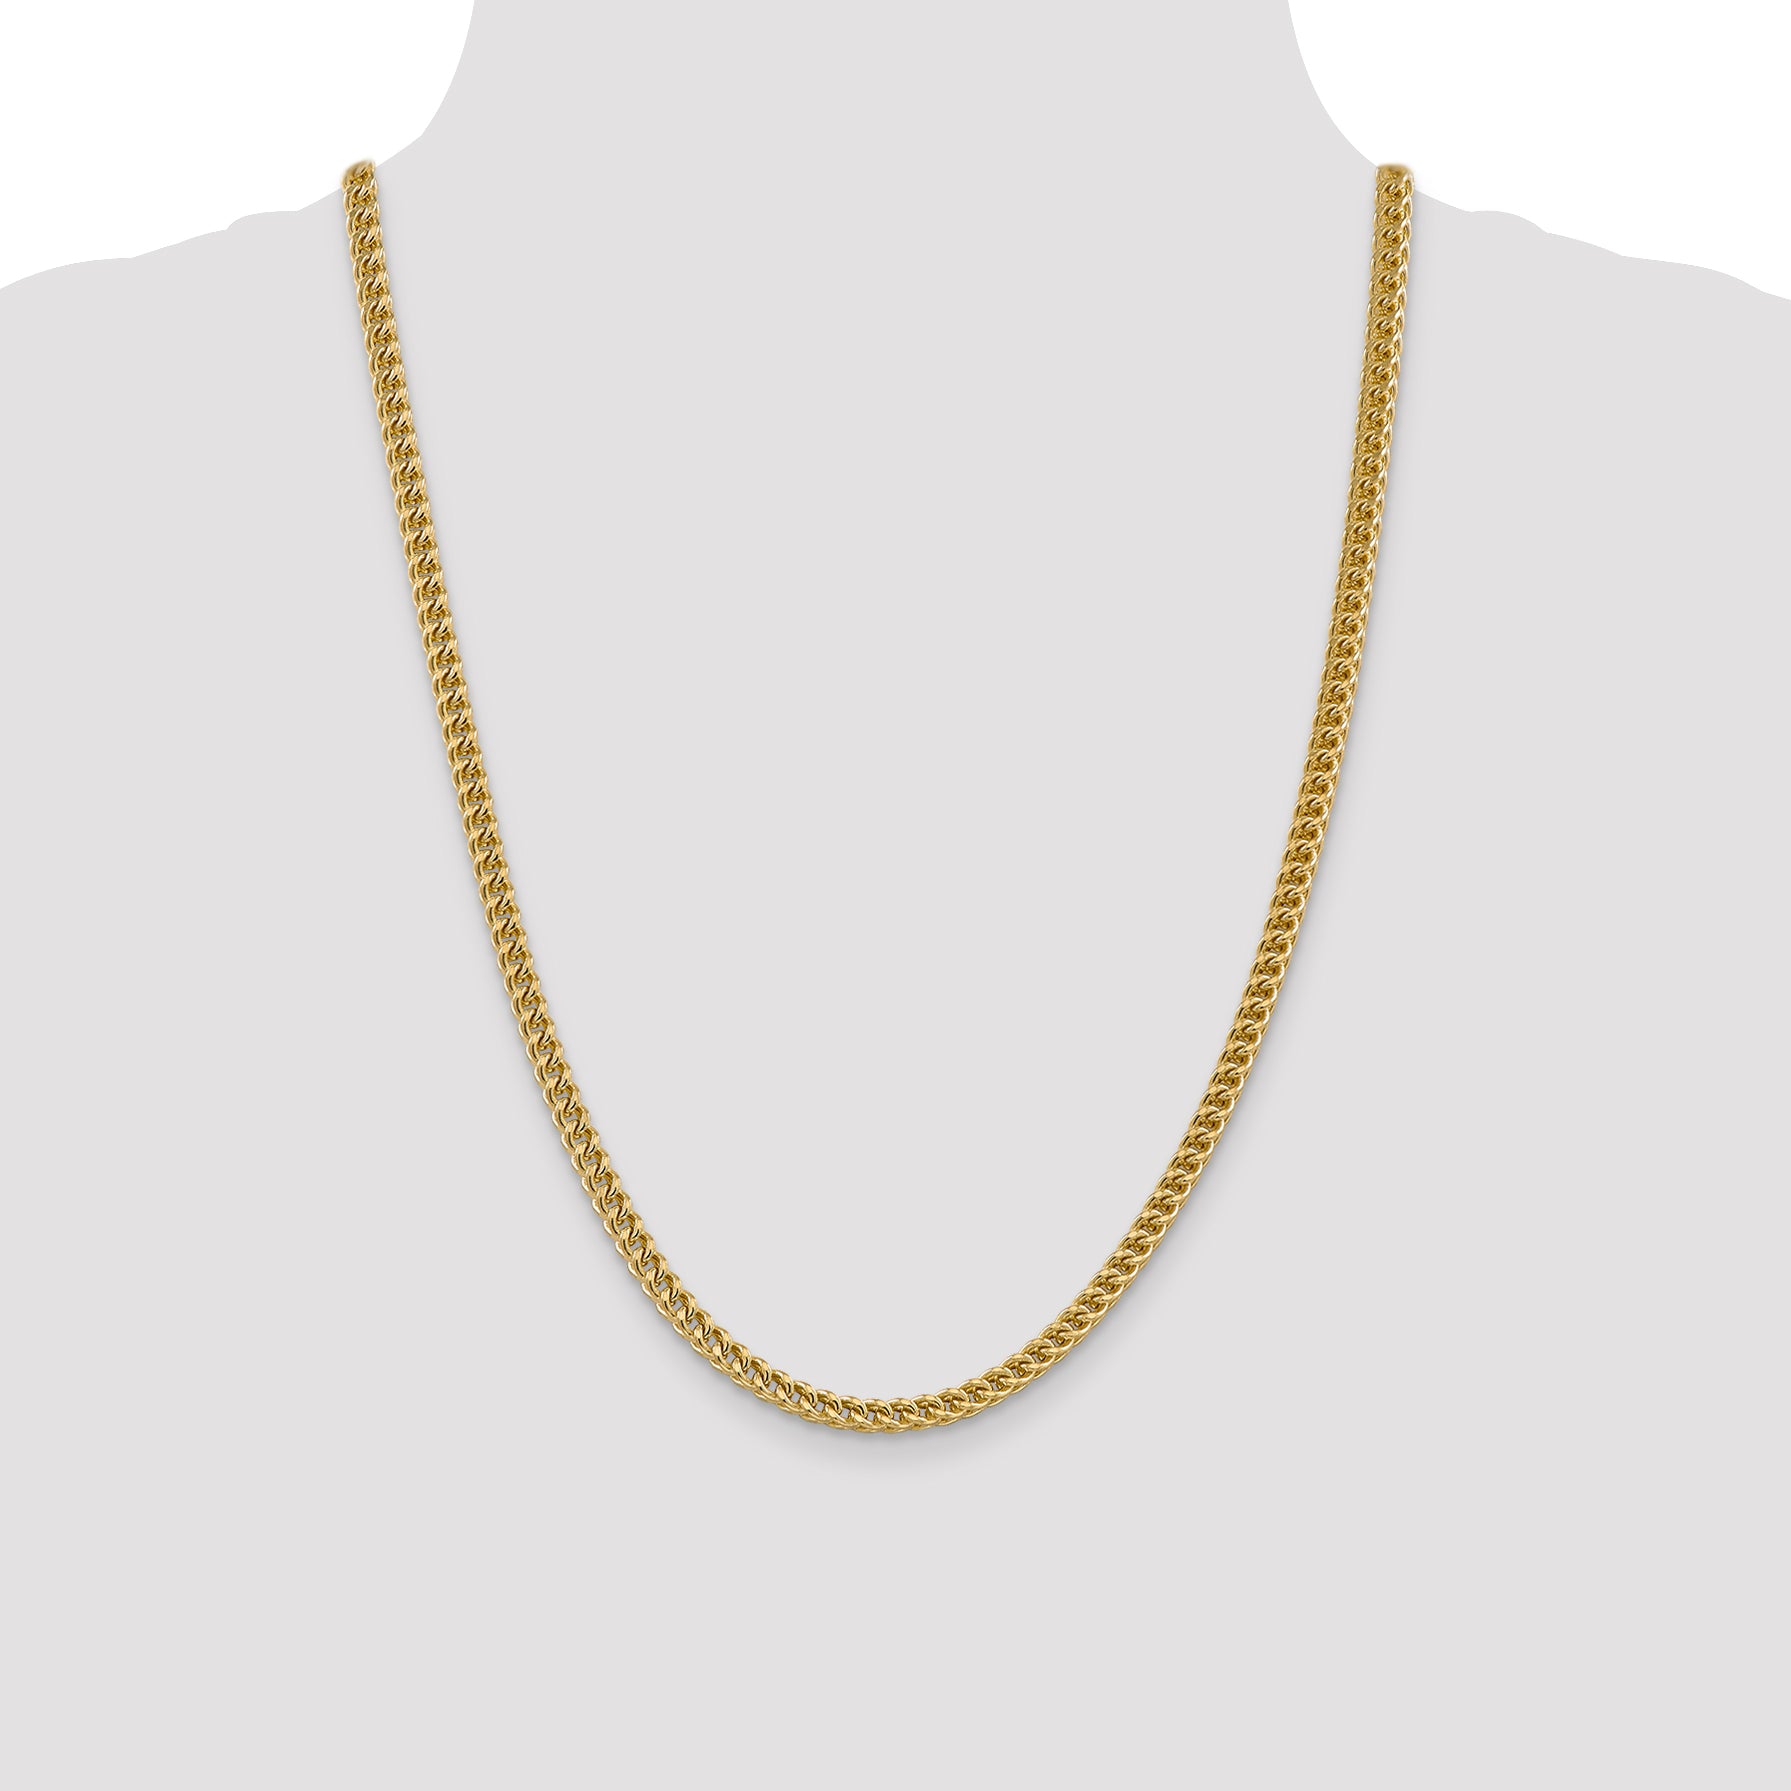 14K 22 inch 4.5mm Semi-Solid Franco with Fancy Lobster Clasp Chain